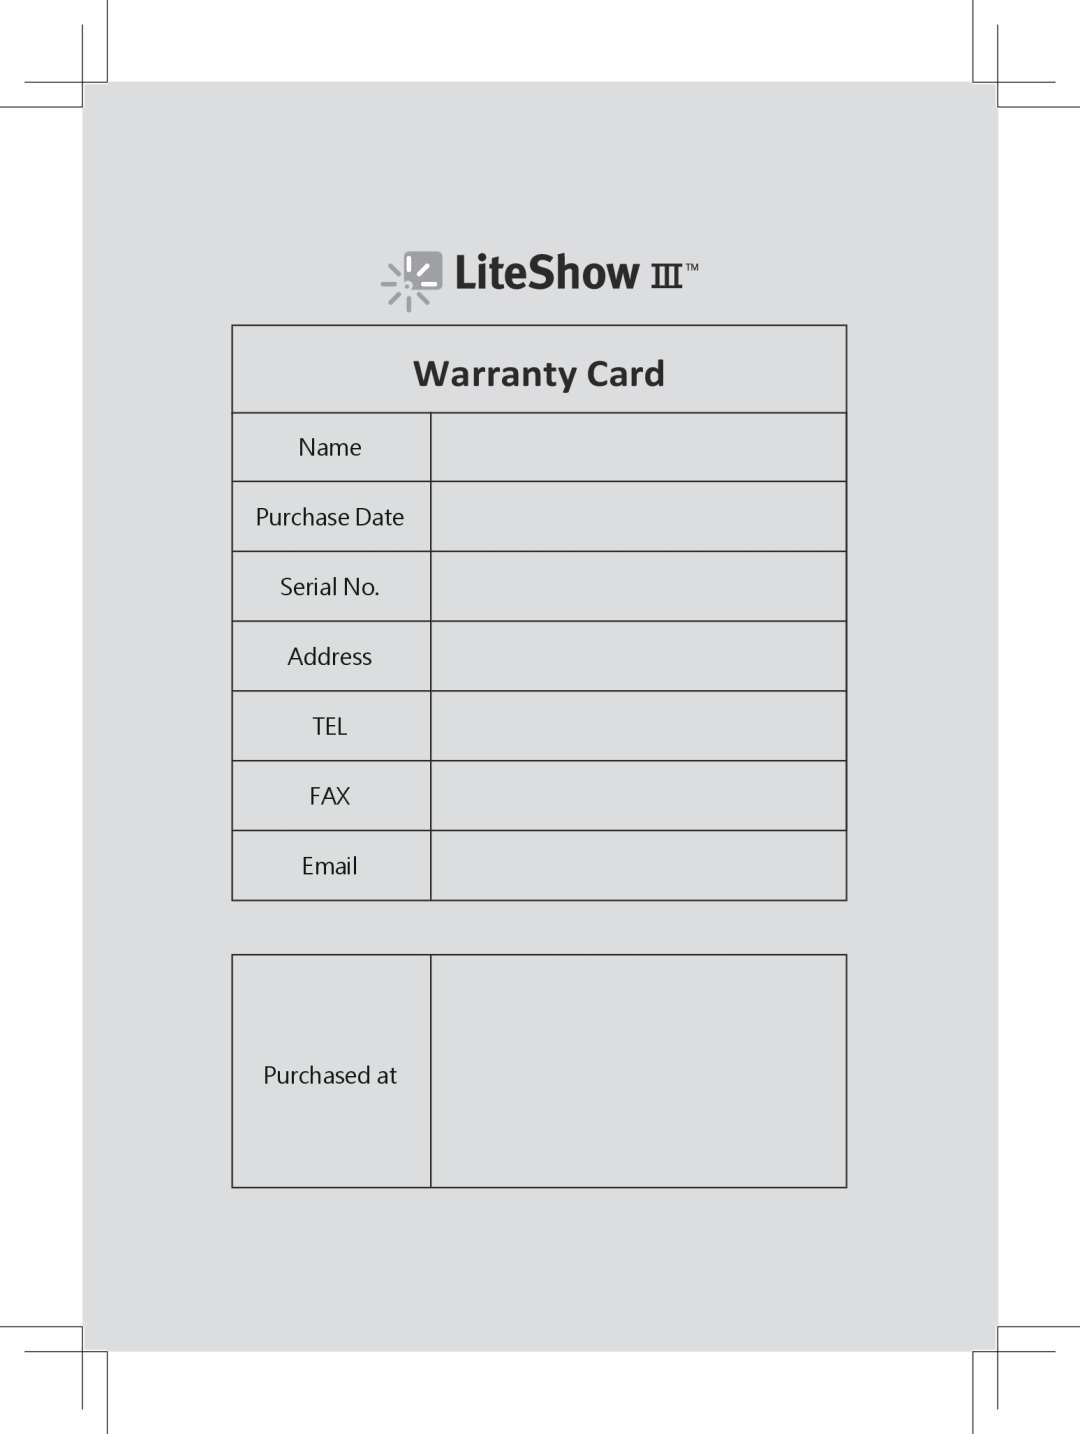 InFocus INLITESHOW3 manual Warranty Card, Name Purchase Date Serial No Address TEL FAX Email Purchased at 